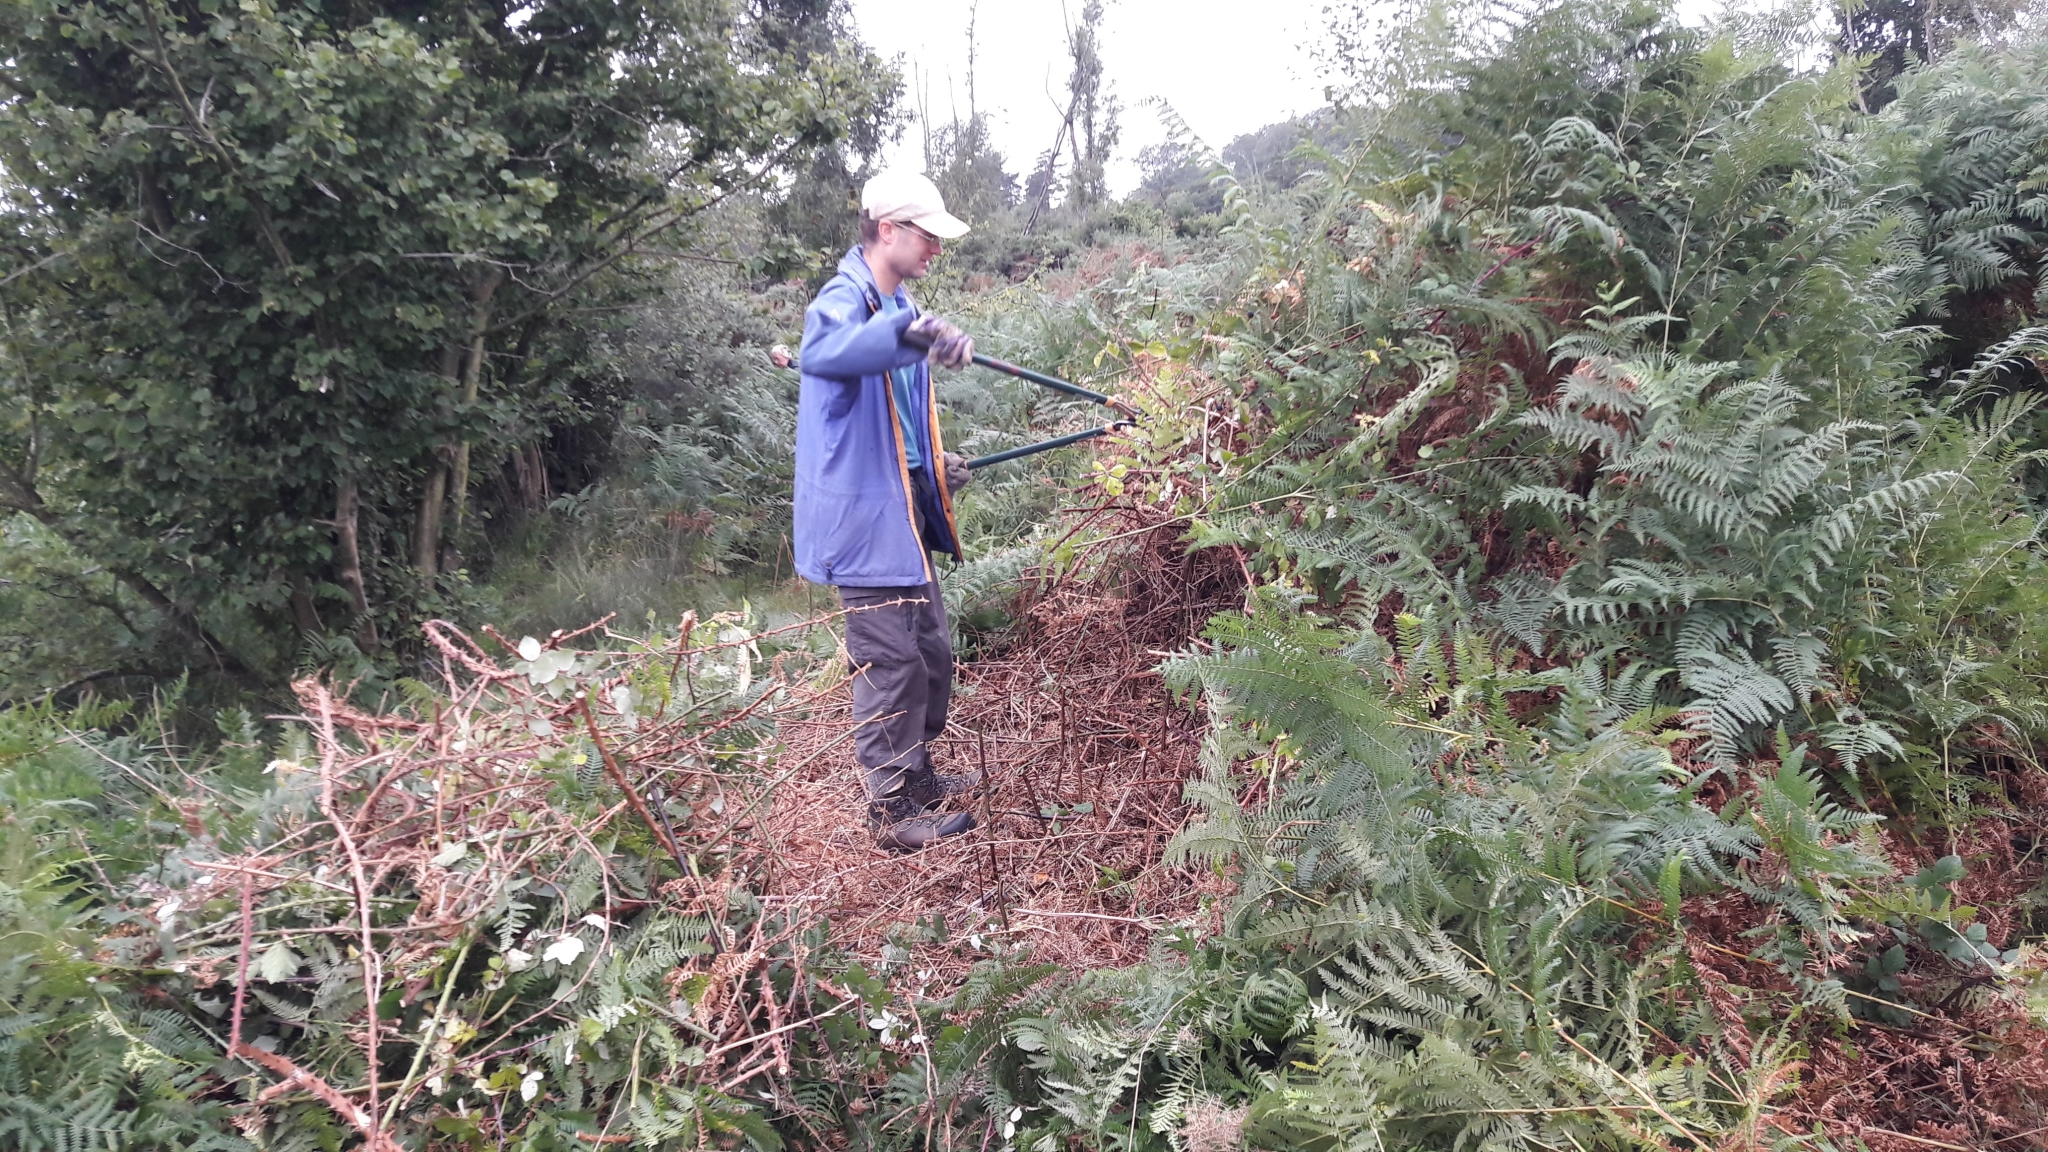 A photo from the FoTF Conservation Event - August 2018 - Gorse Removal at Hockham Hills & Holes : A volunteer used loppers on vegetation